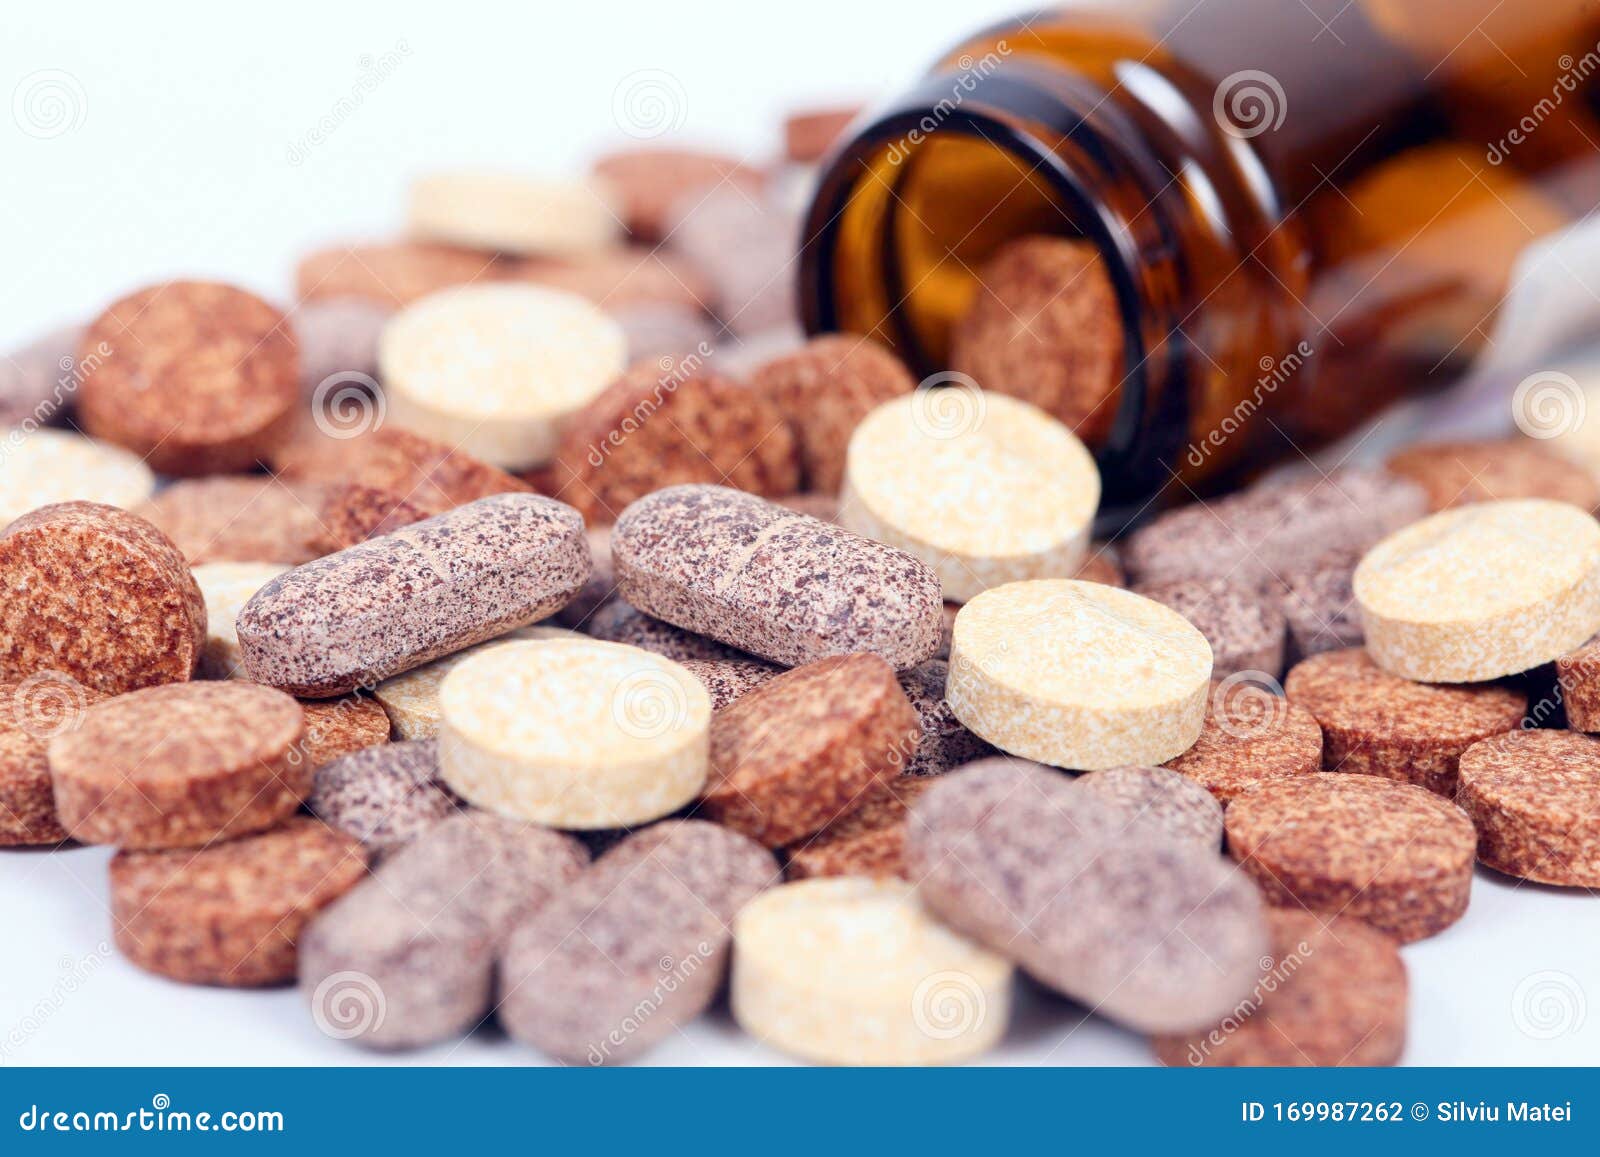 closeup of herbal vitamin and supplement pills with herbs.